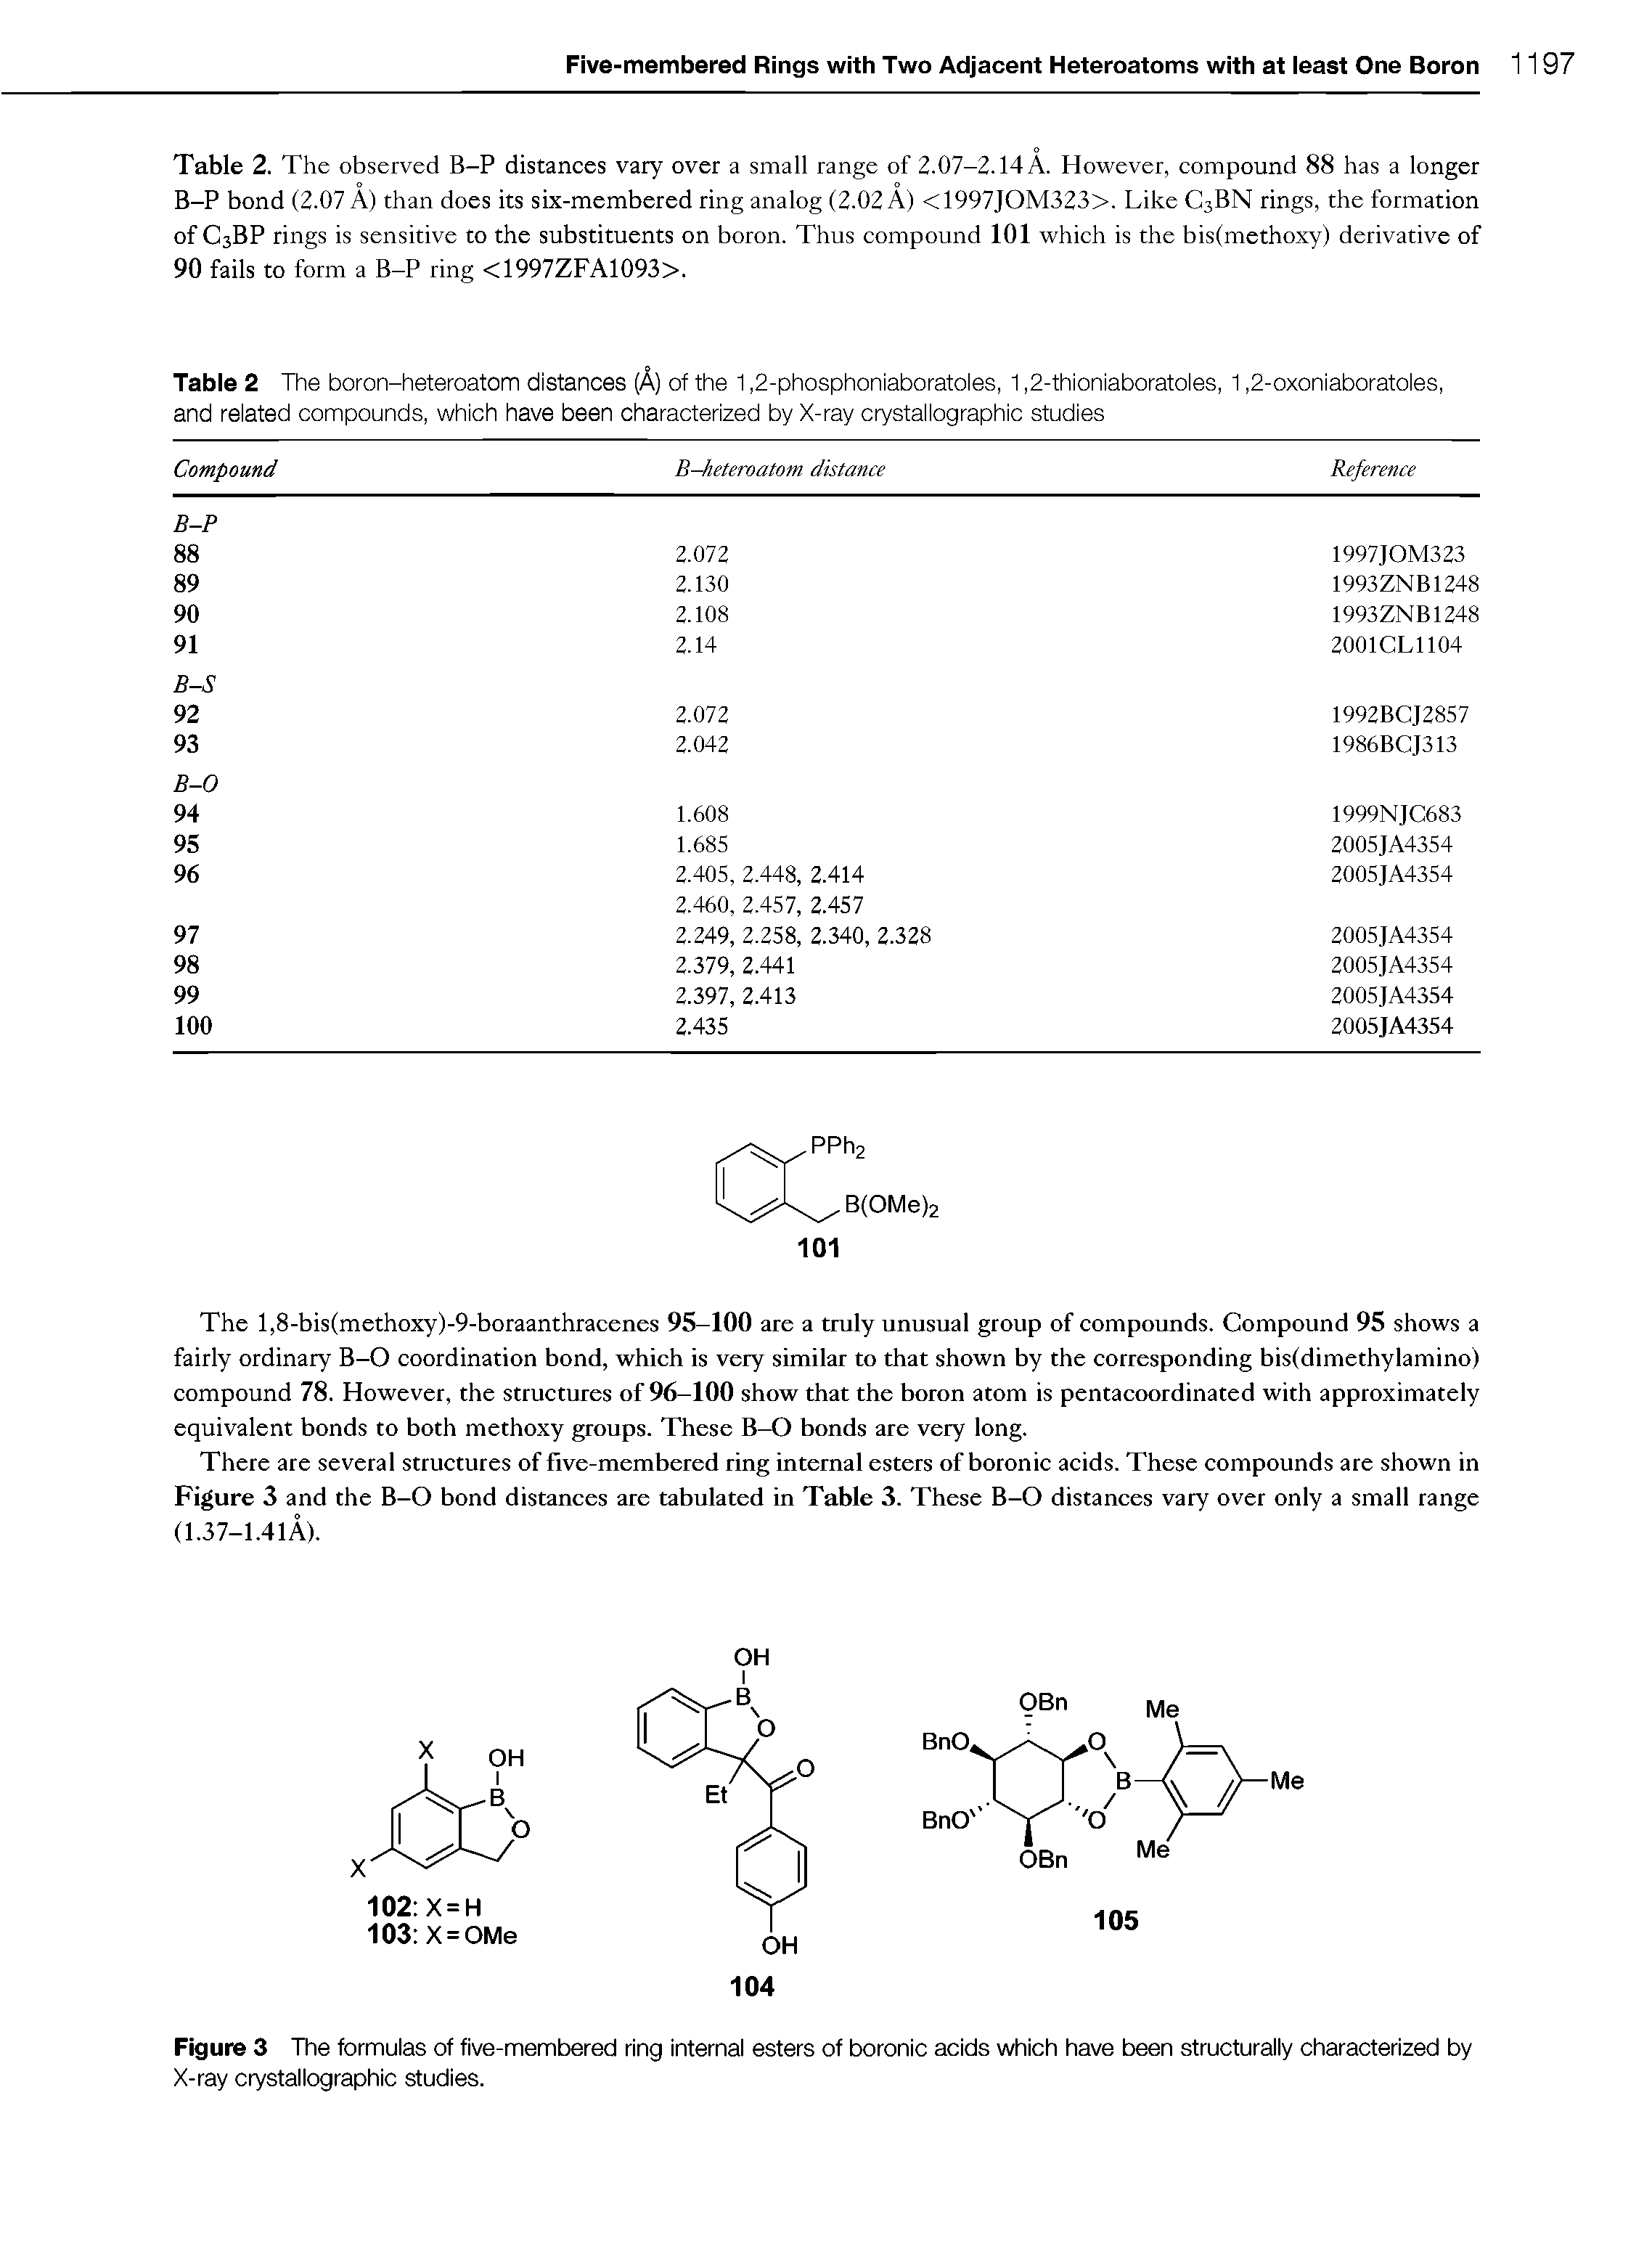 Figure 3 The formulas of five-membered ring internal esters of boronic acids which have been structurally characterized by X-ray crystallographic studies.